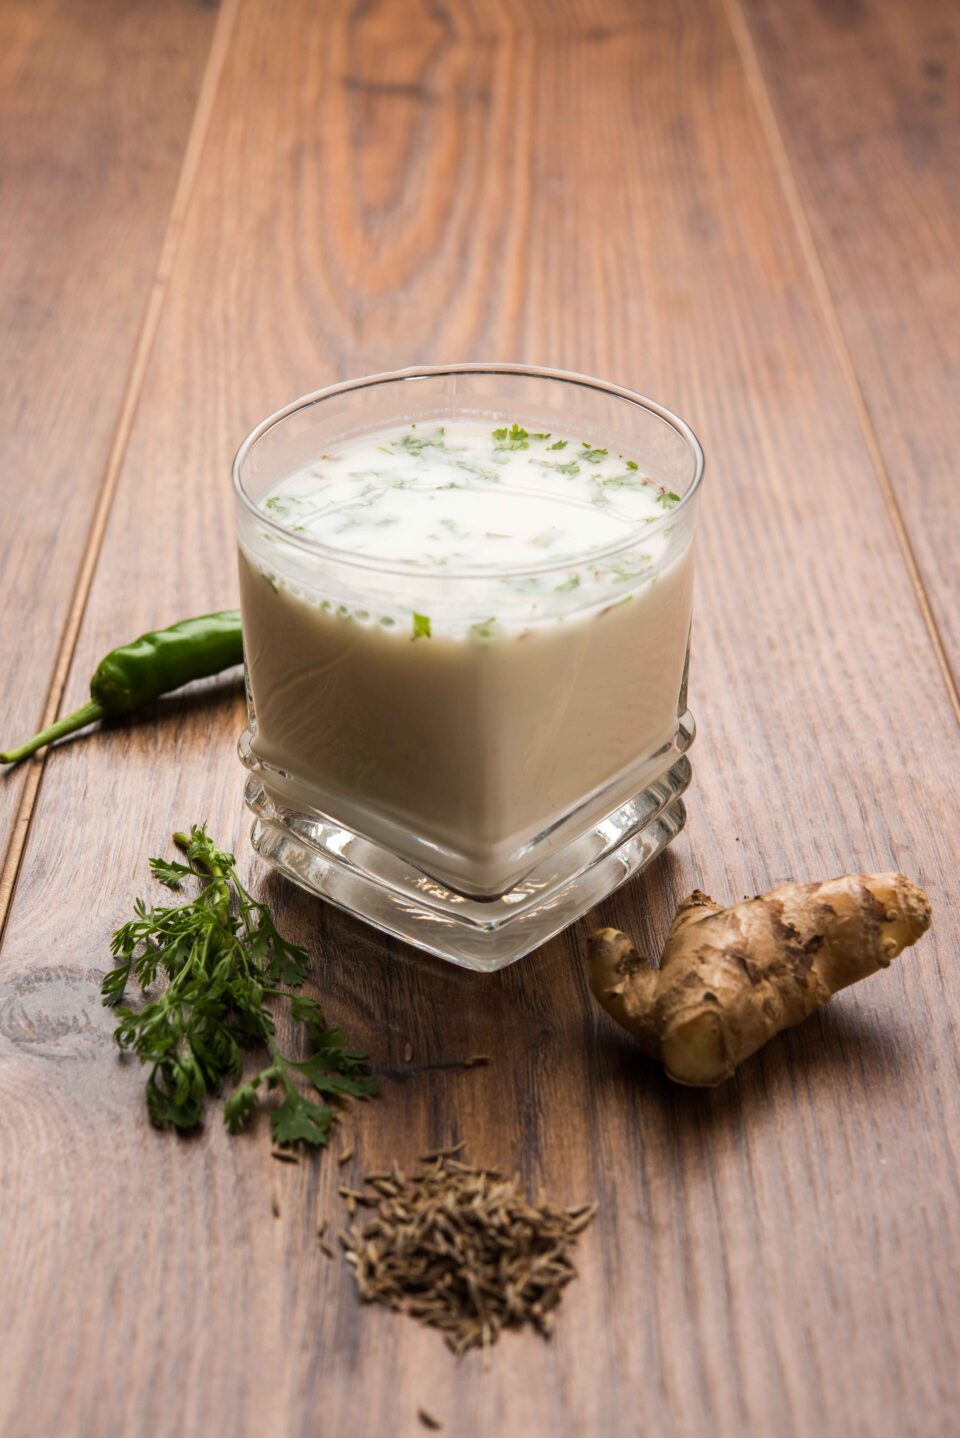 AYURVEDIC DOCTOR GIVES TIPS - HOW TO USE BUTTERMILK FOR VARIOUS HEALTH BENEFITS